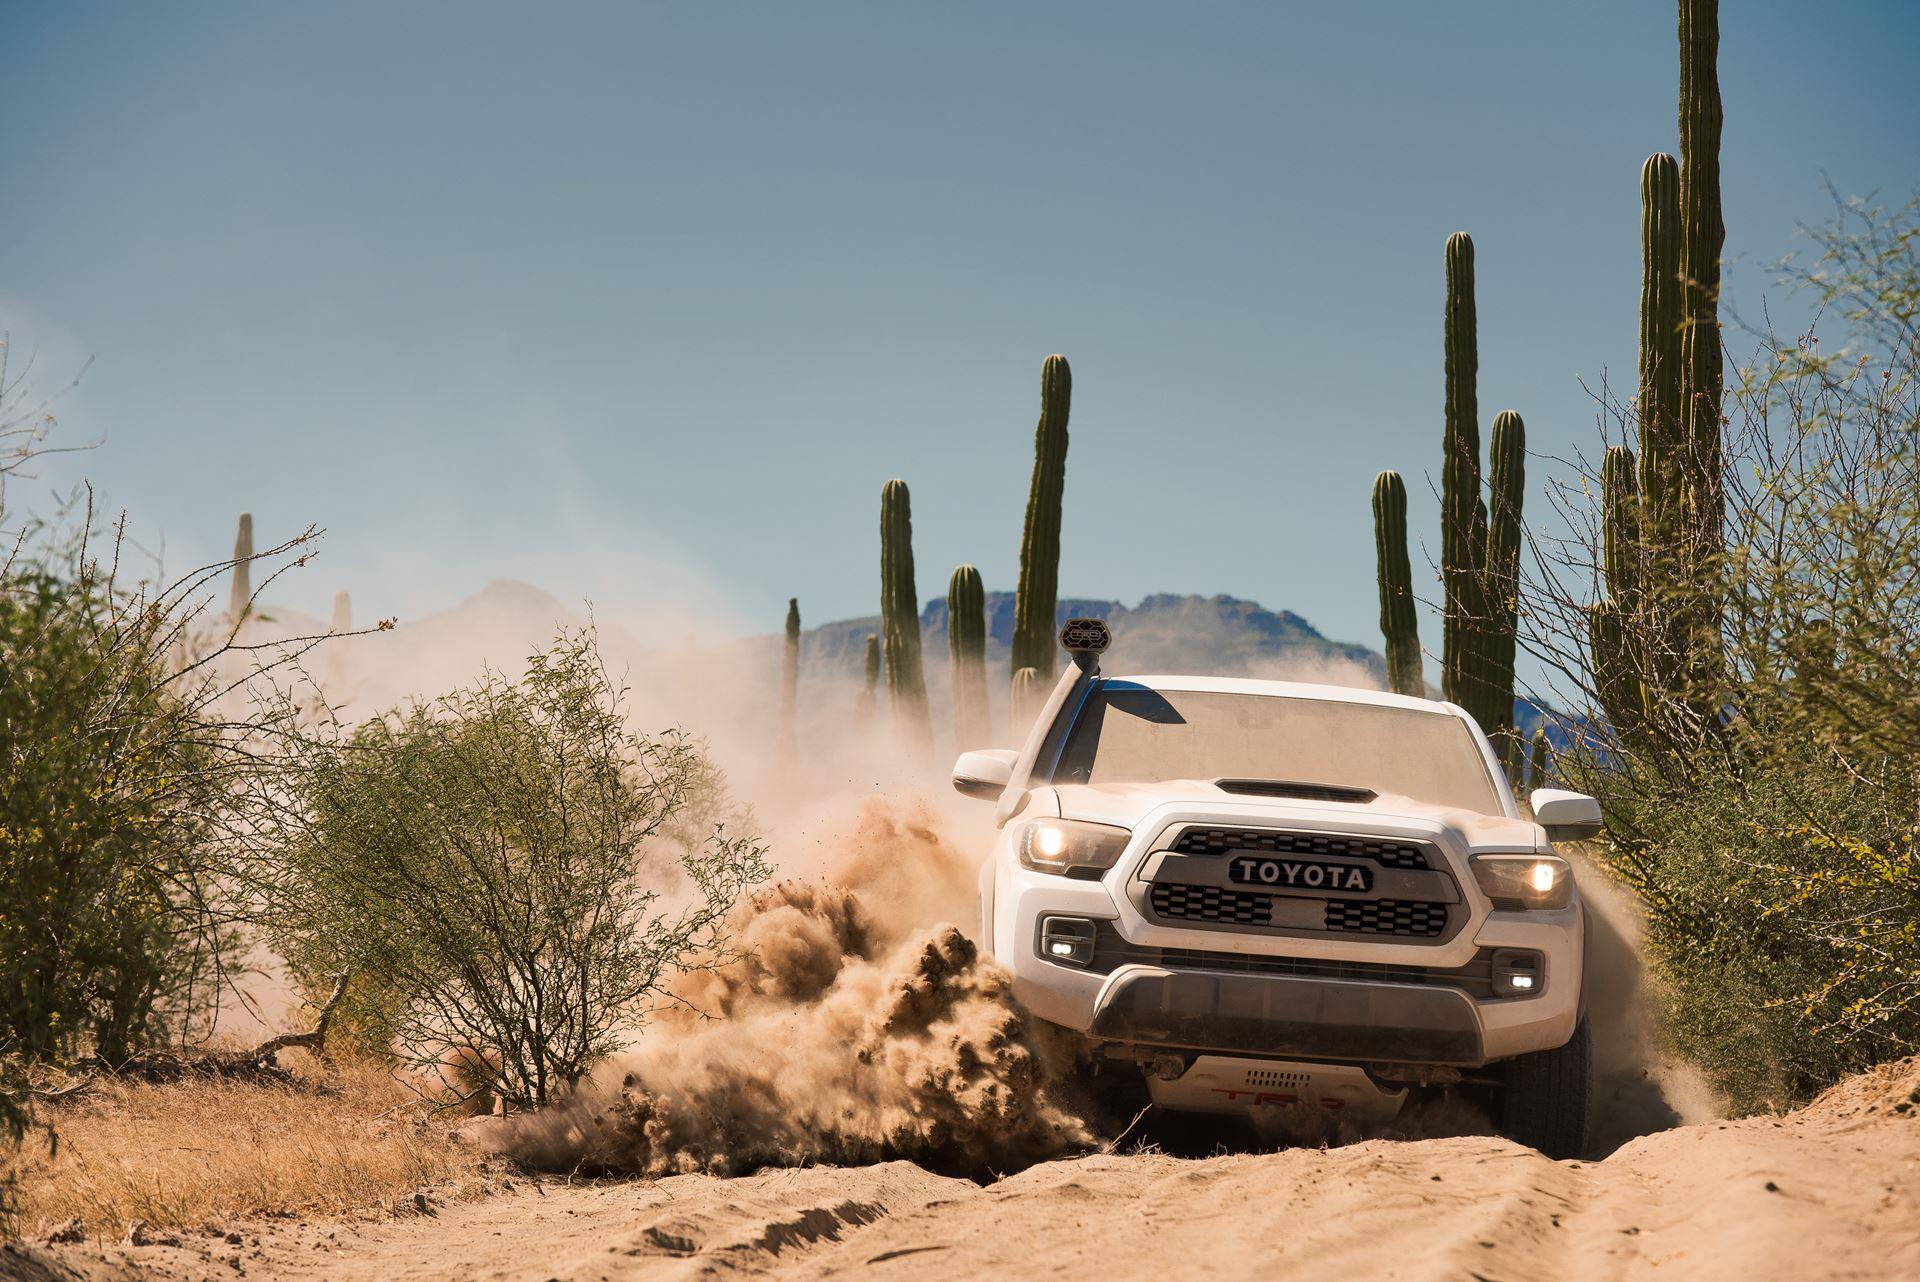 2019 Toyota Tacoma Trd Pro Wallpapers - Tacoma Trd Pro With Snorkel - HD Wallpaper 